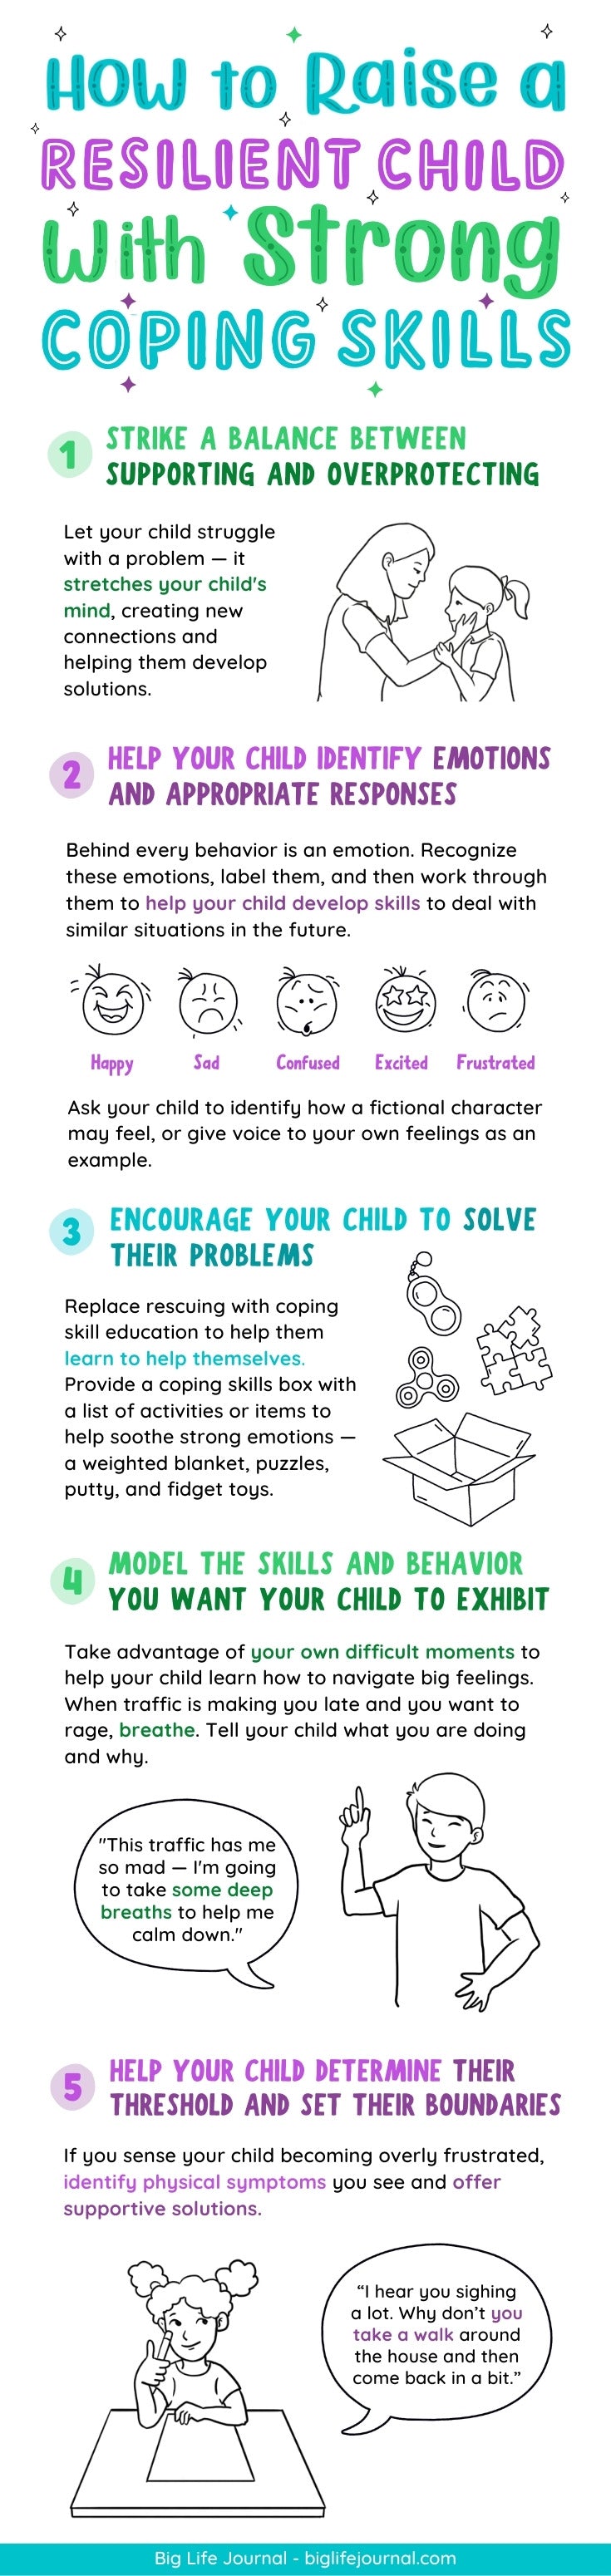 How to Raise a Resilient Child with Strong Coping Skills